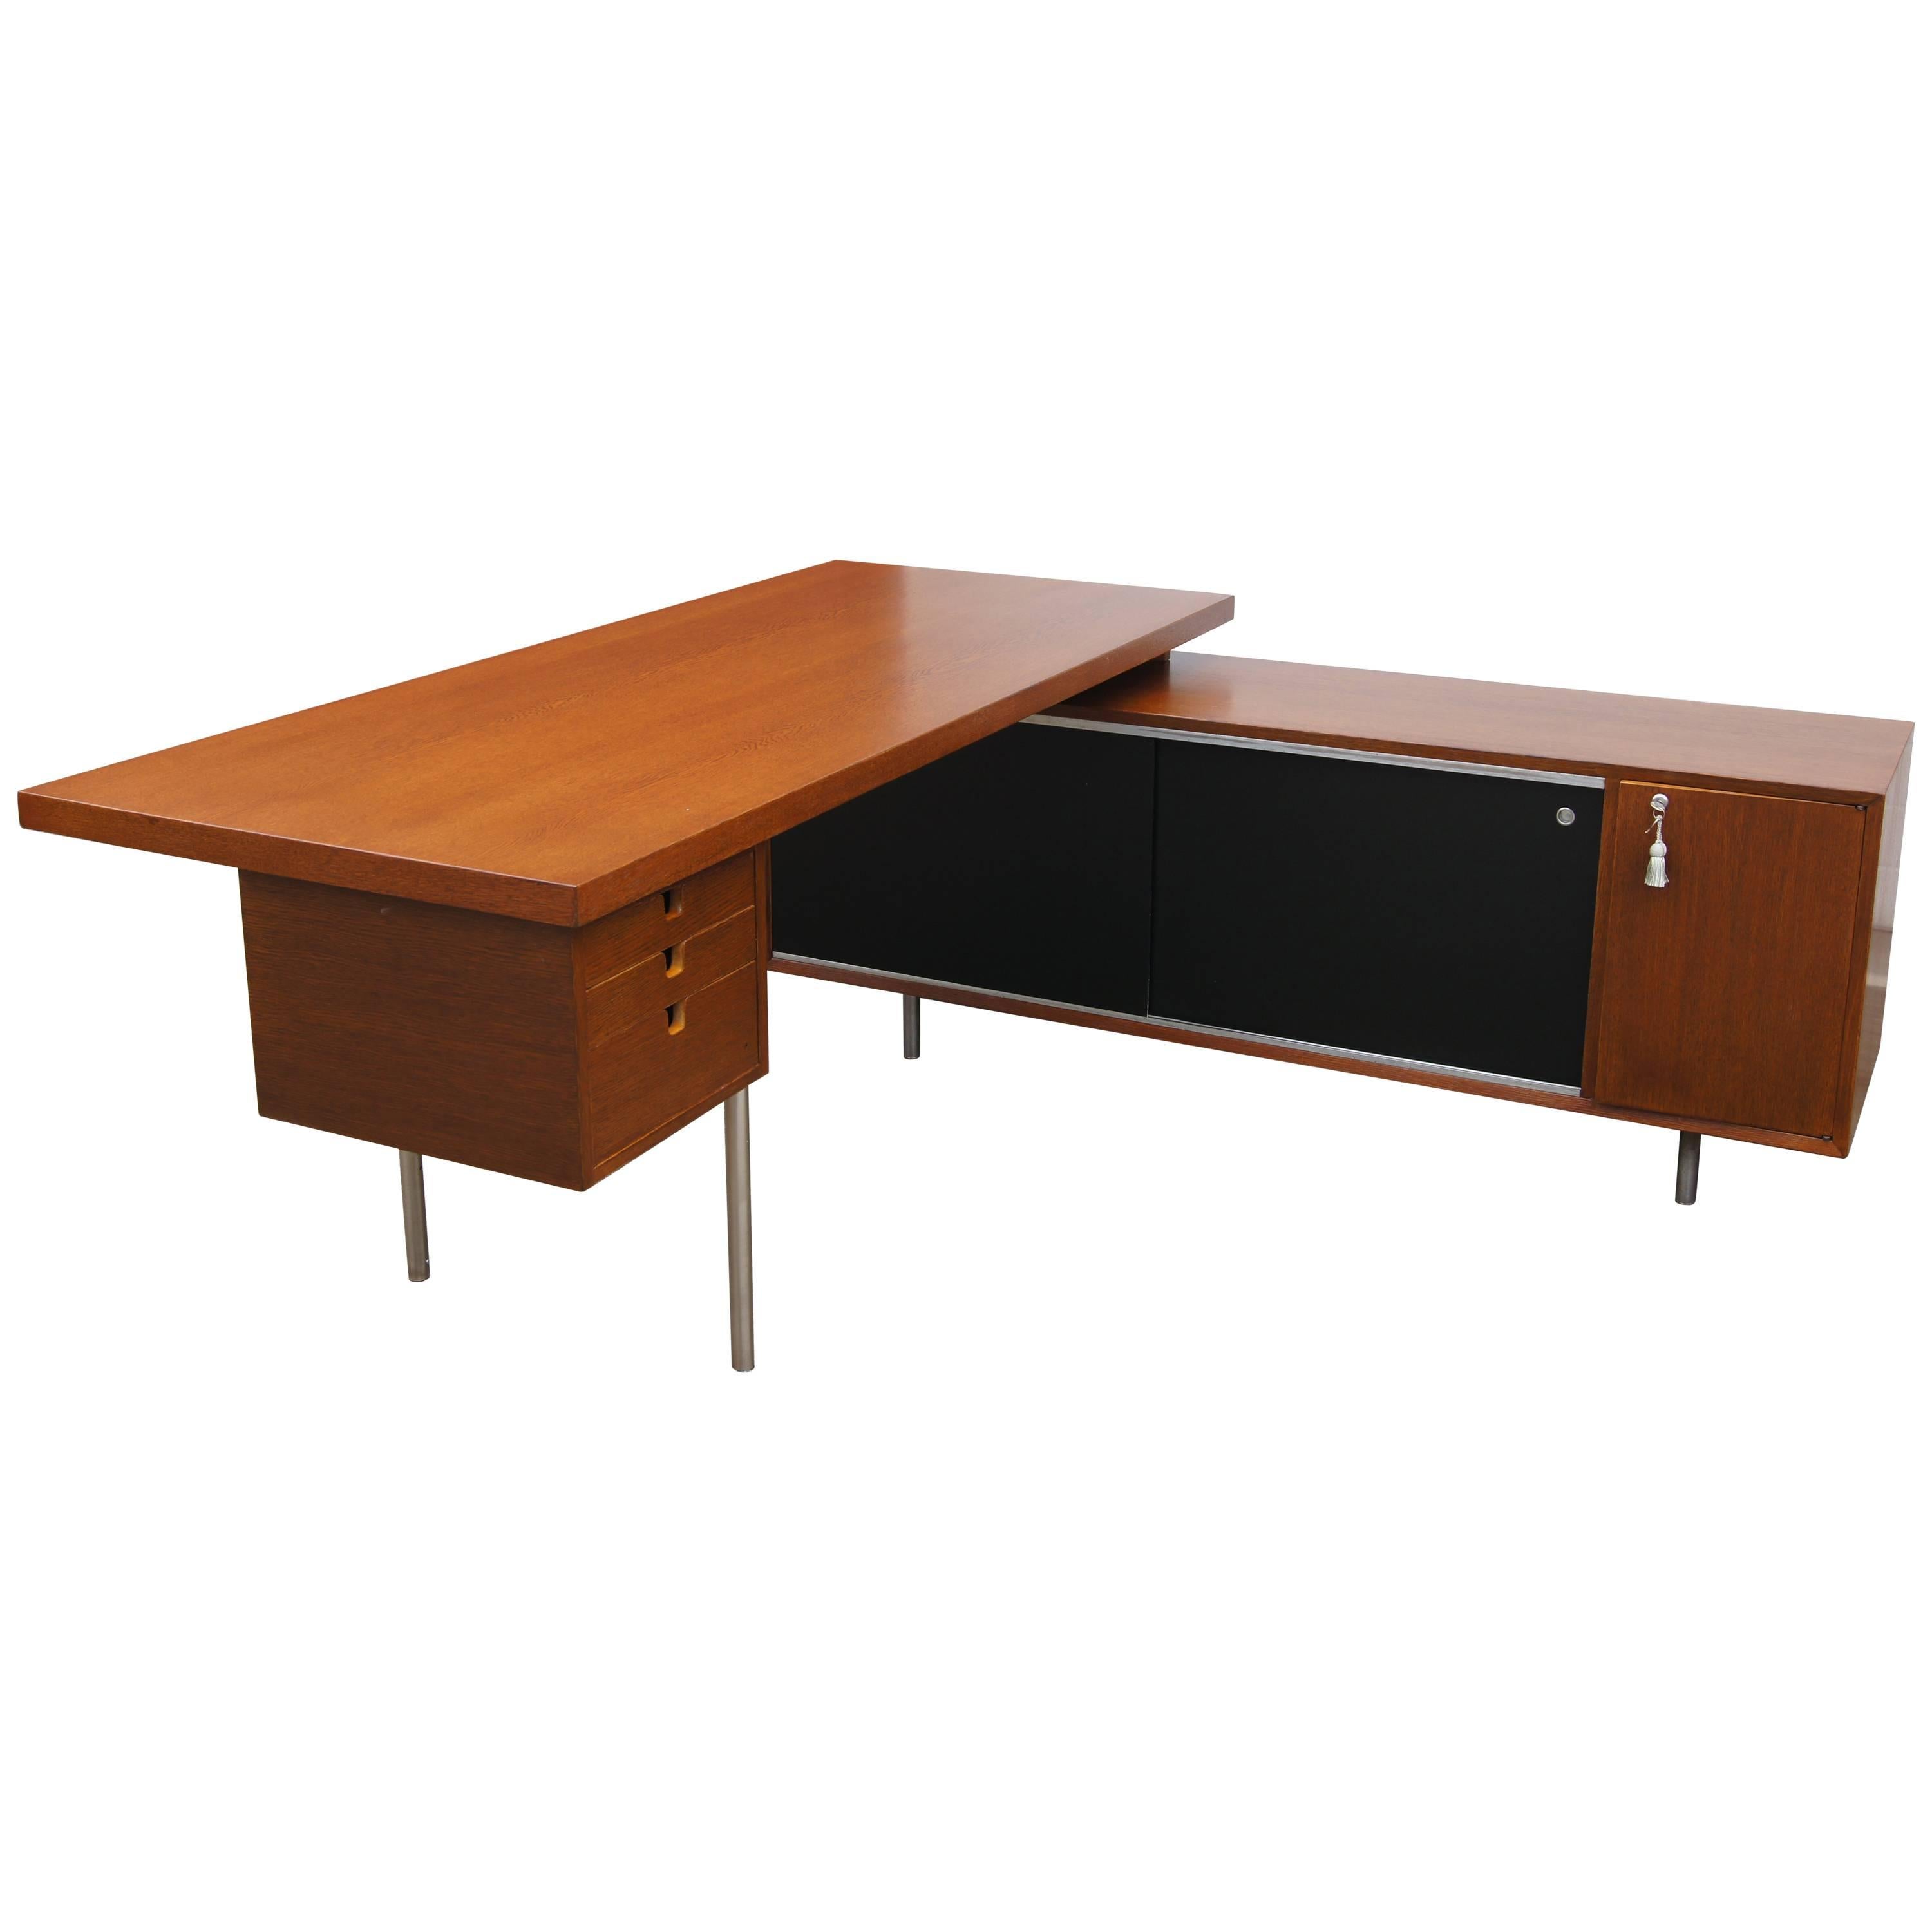 Walnut EOG Desk with Storage Unit by George Nelson for Herman Miller